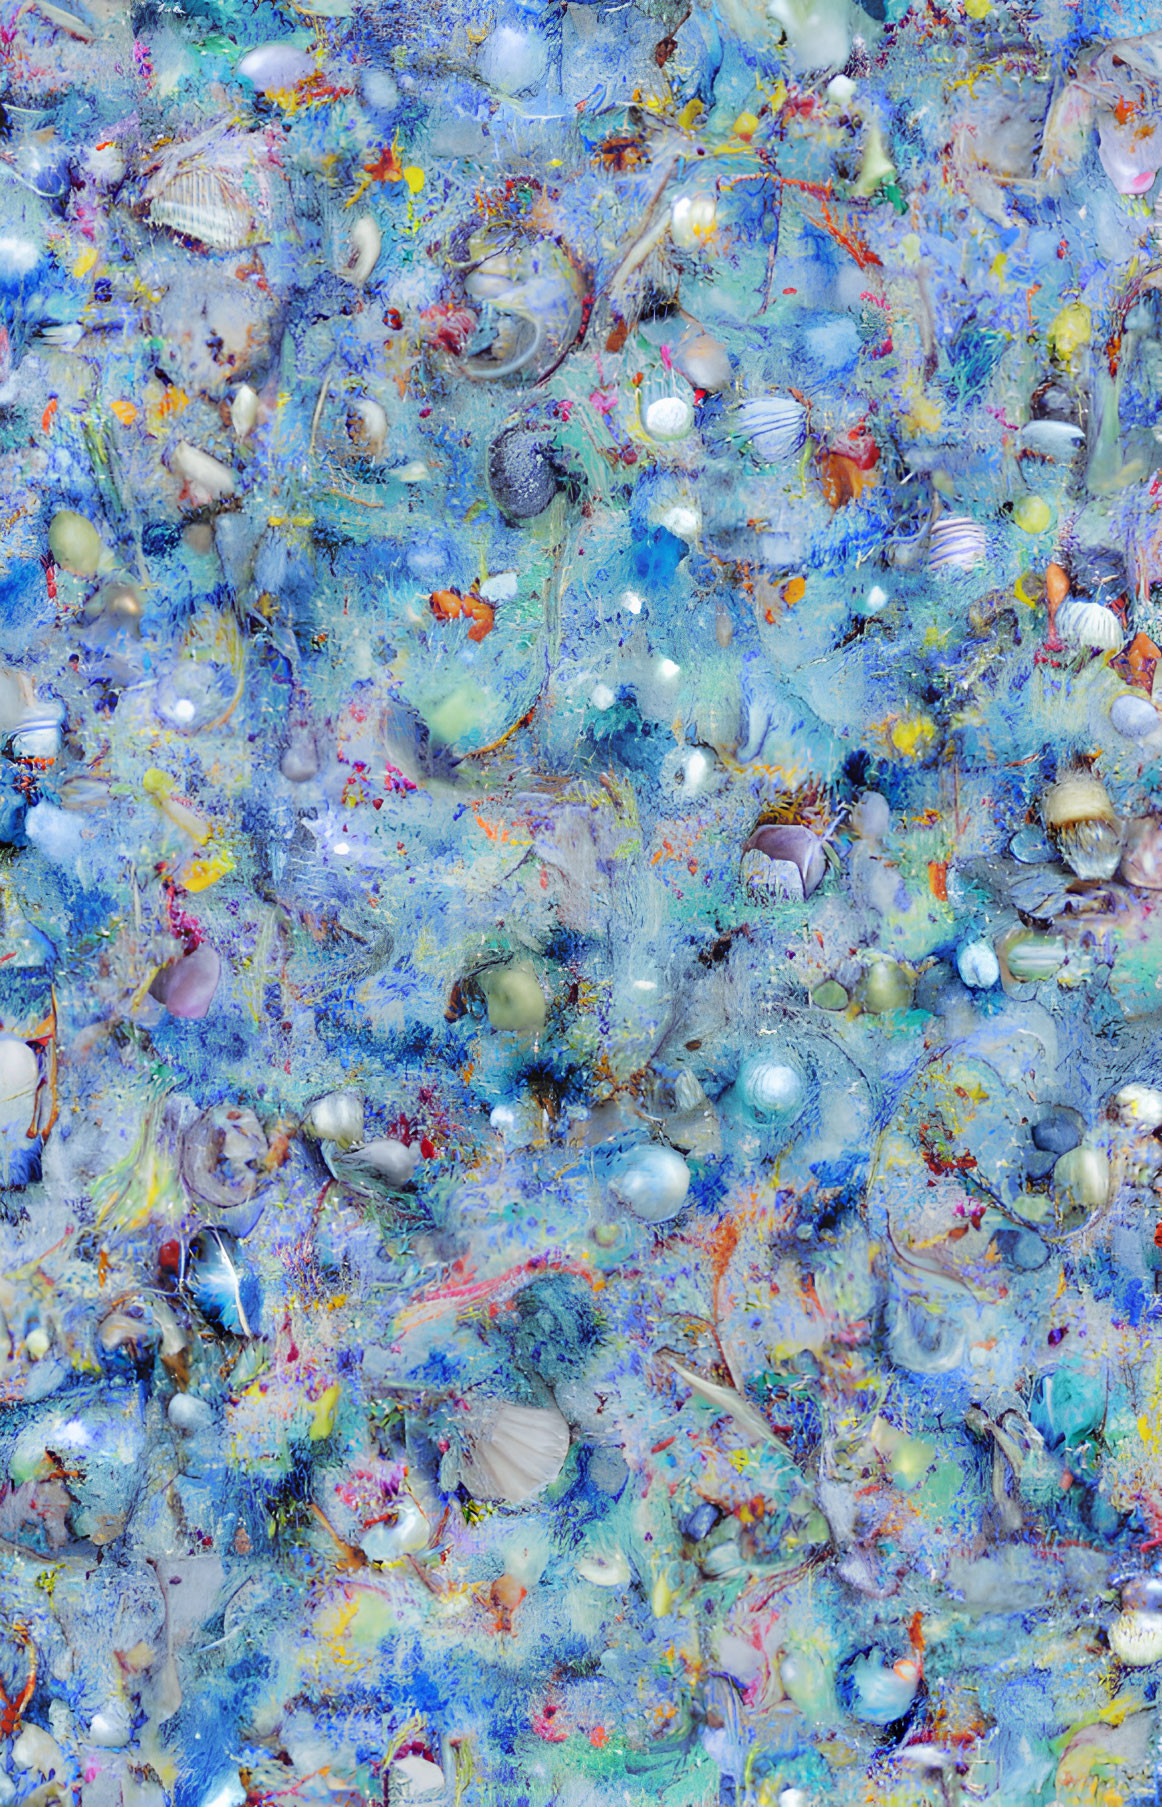 Colorful Abstract Oceanic Collage with Seashells and Beads